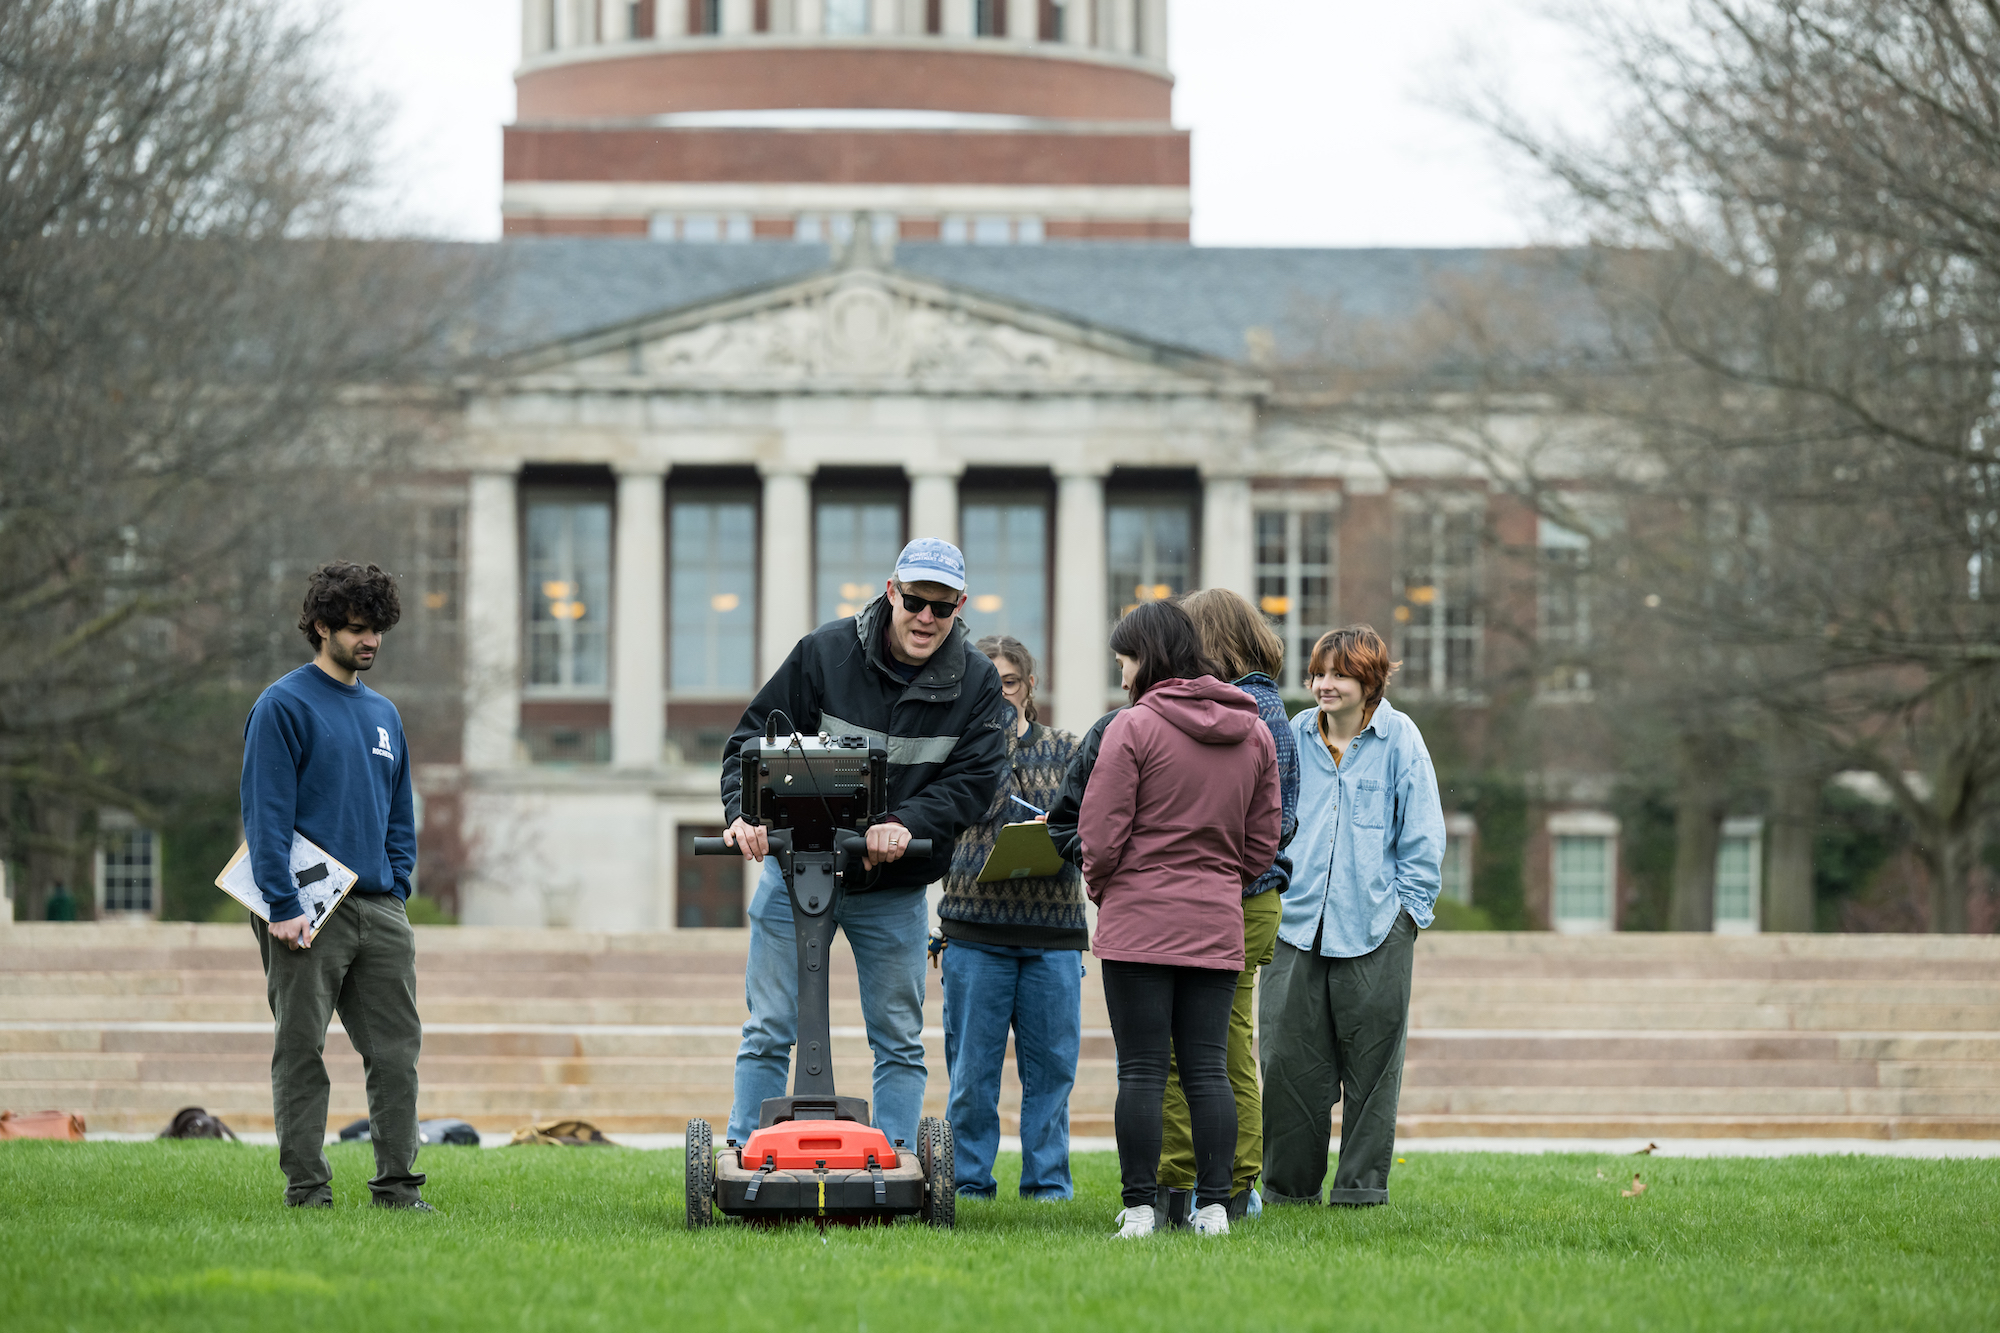 Professor and a group of students out on a grassy quad with survey equipment